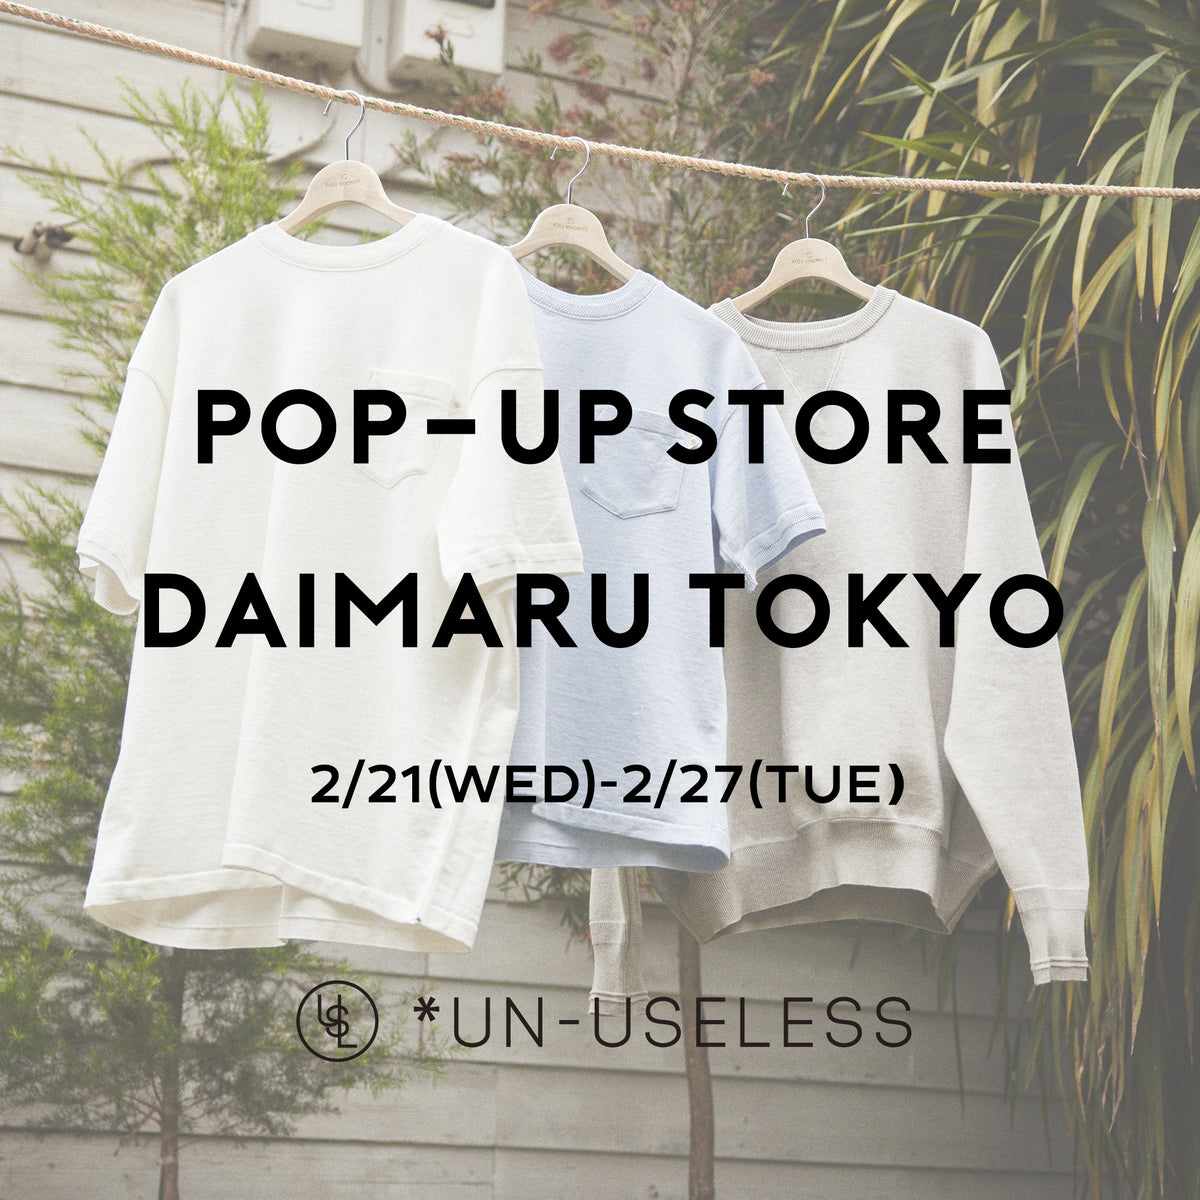 ≪POP-UP STORE≫ のご案内